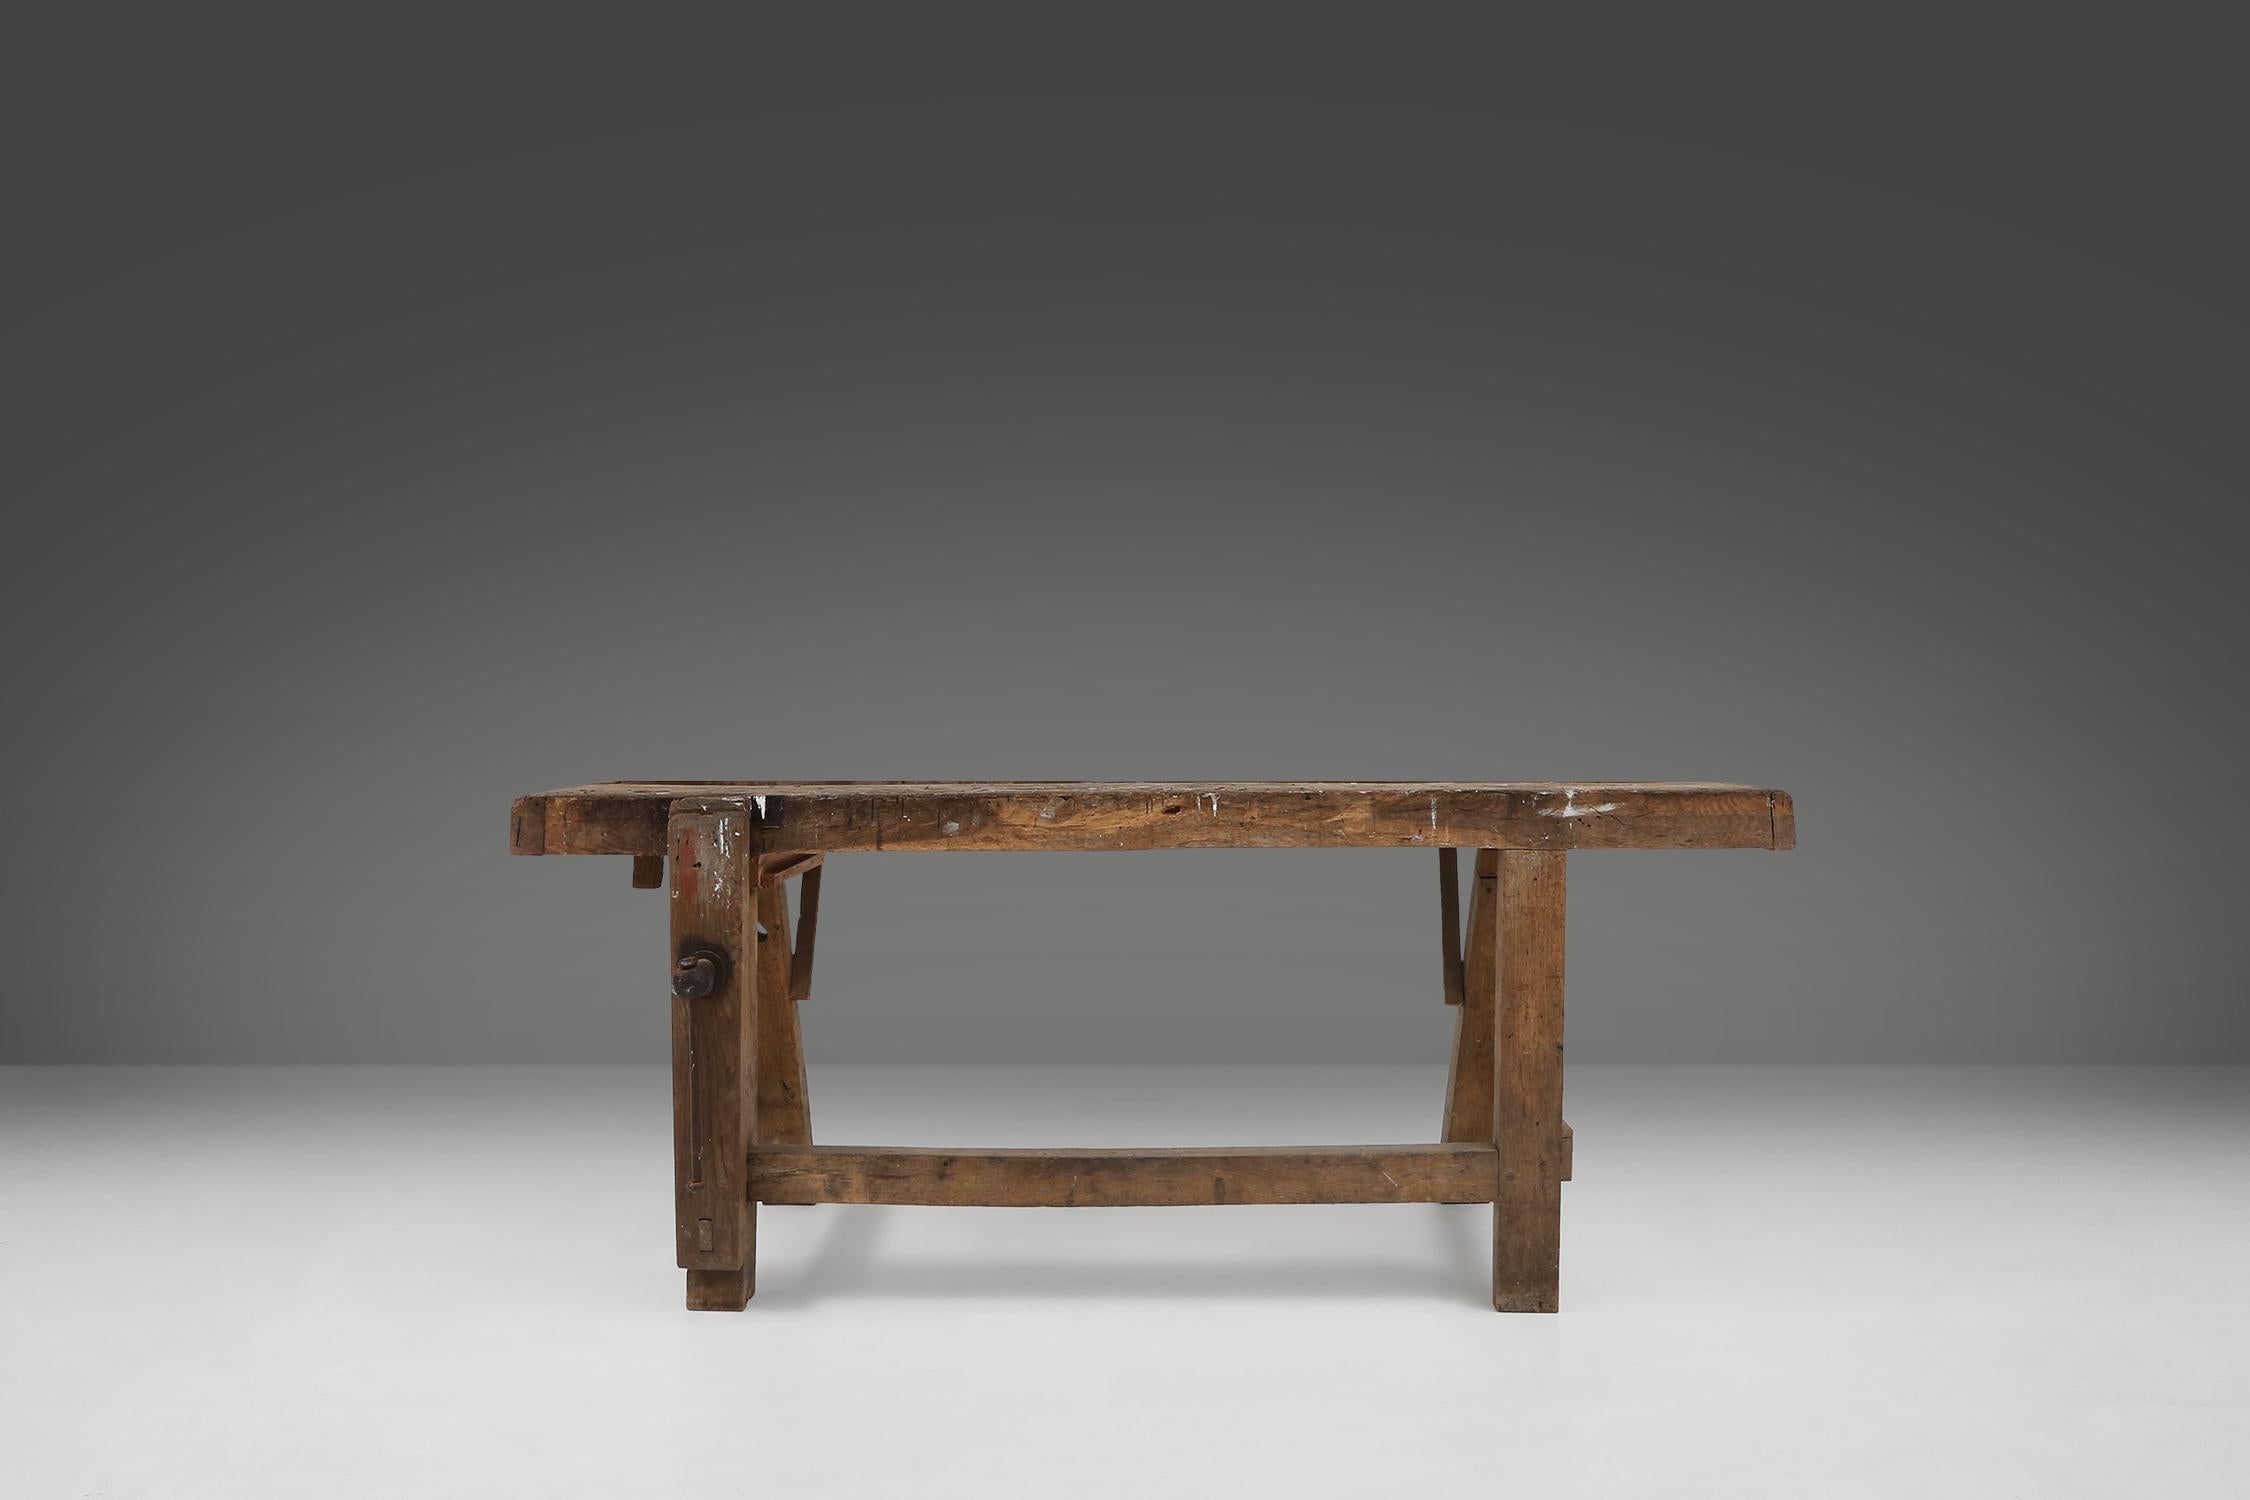 This beautiful old workbench is made of solid wood and has a beautiful patina on the wood. It is a unique piece that fits perfectly in any interior. The workbench is not only functional but also a real eye-catcher. This is a unique opportunity to